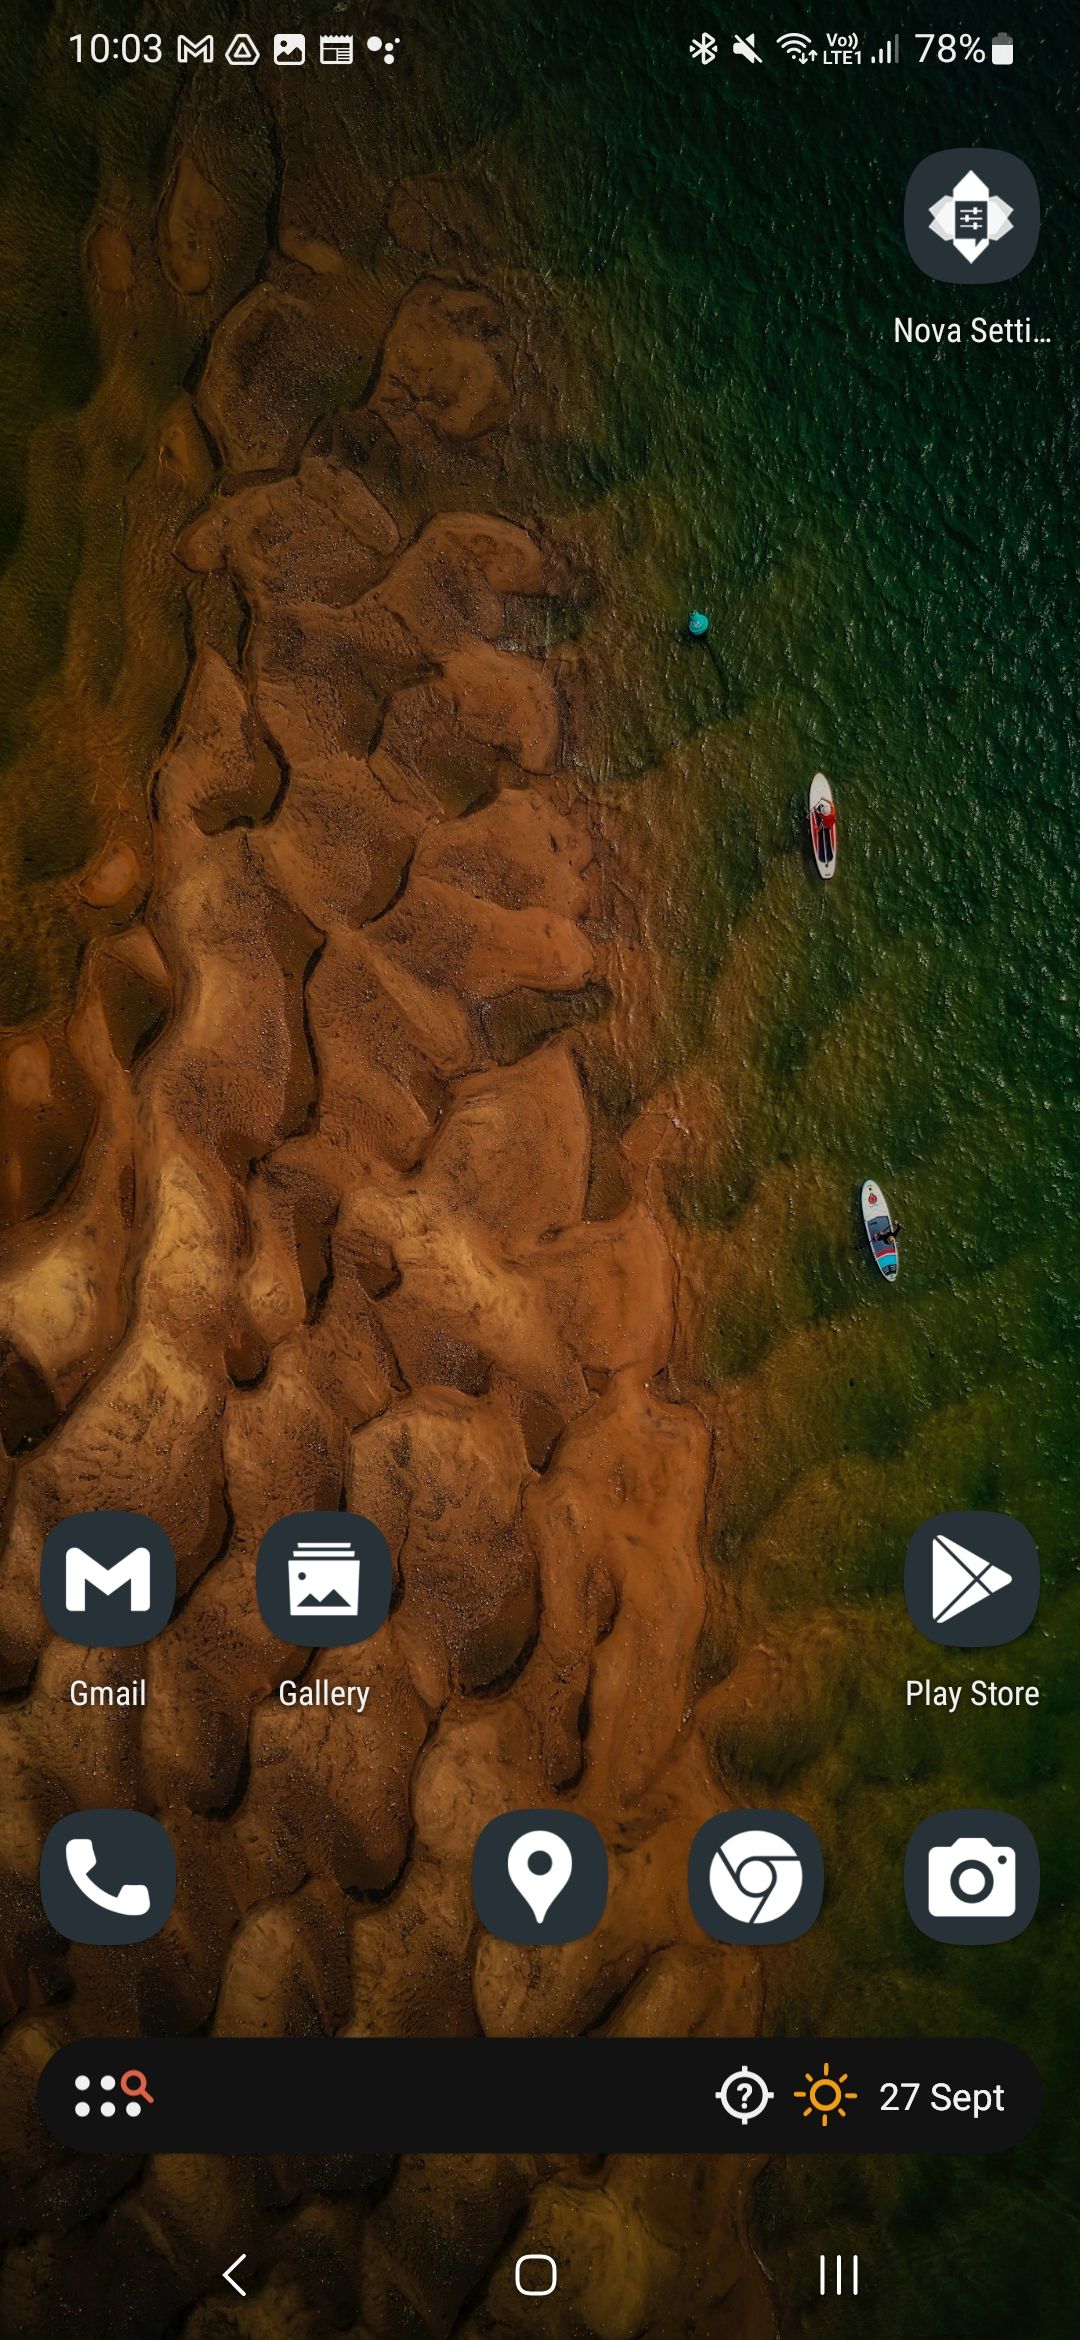 Nova launcher home screen with icon pack applied